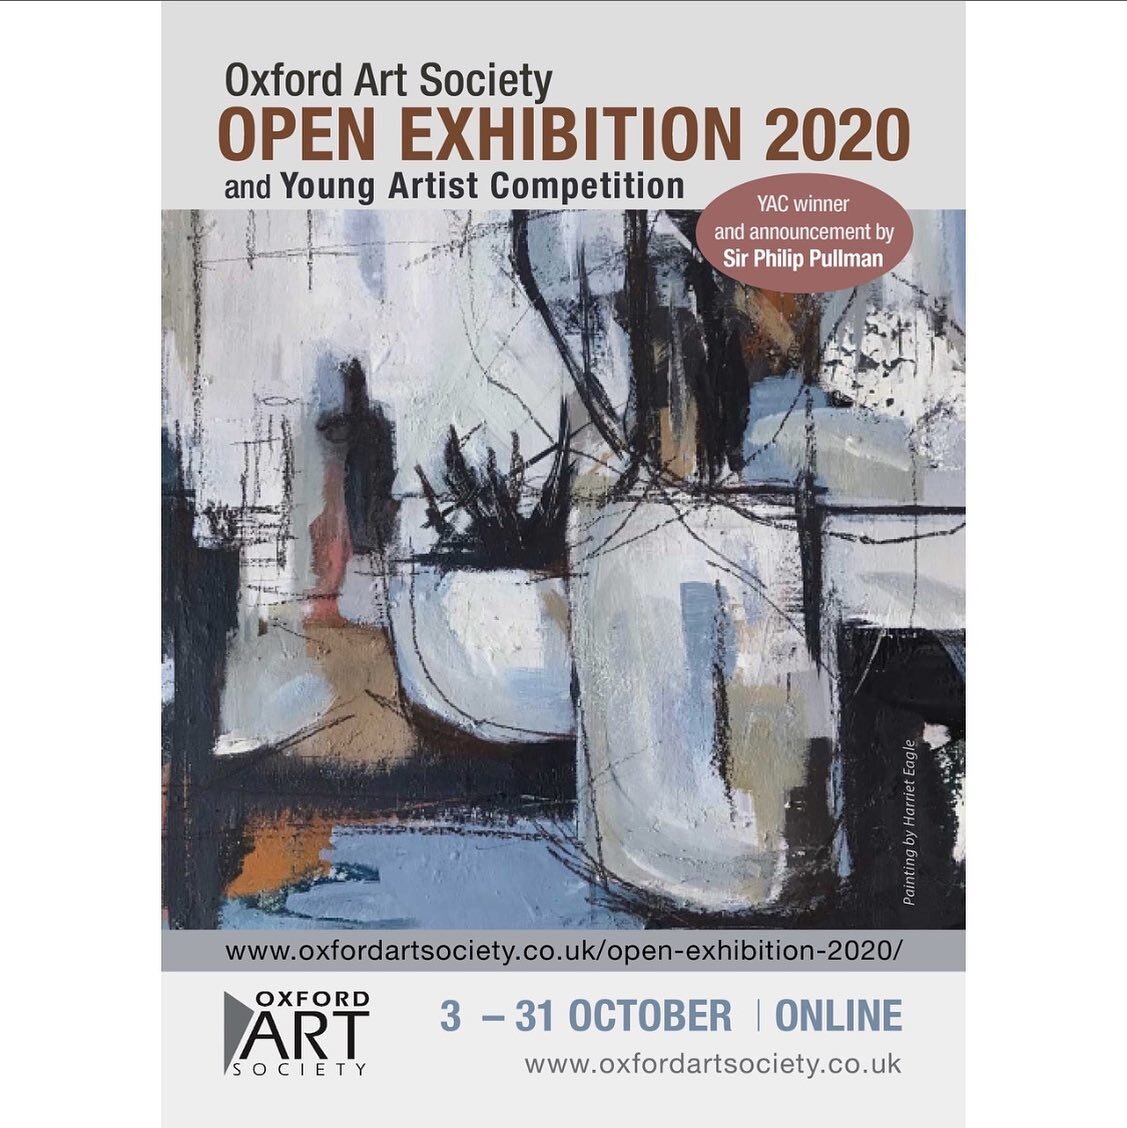 Really pleased to be part of the 2020 @oxfordartsociety open exhibition. It&rsquo;s online this year so super easy to check out from the comfort of your own home! Fabulous collection of artists taking part including my @oxfordshireartweeks partners i